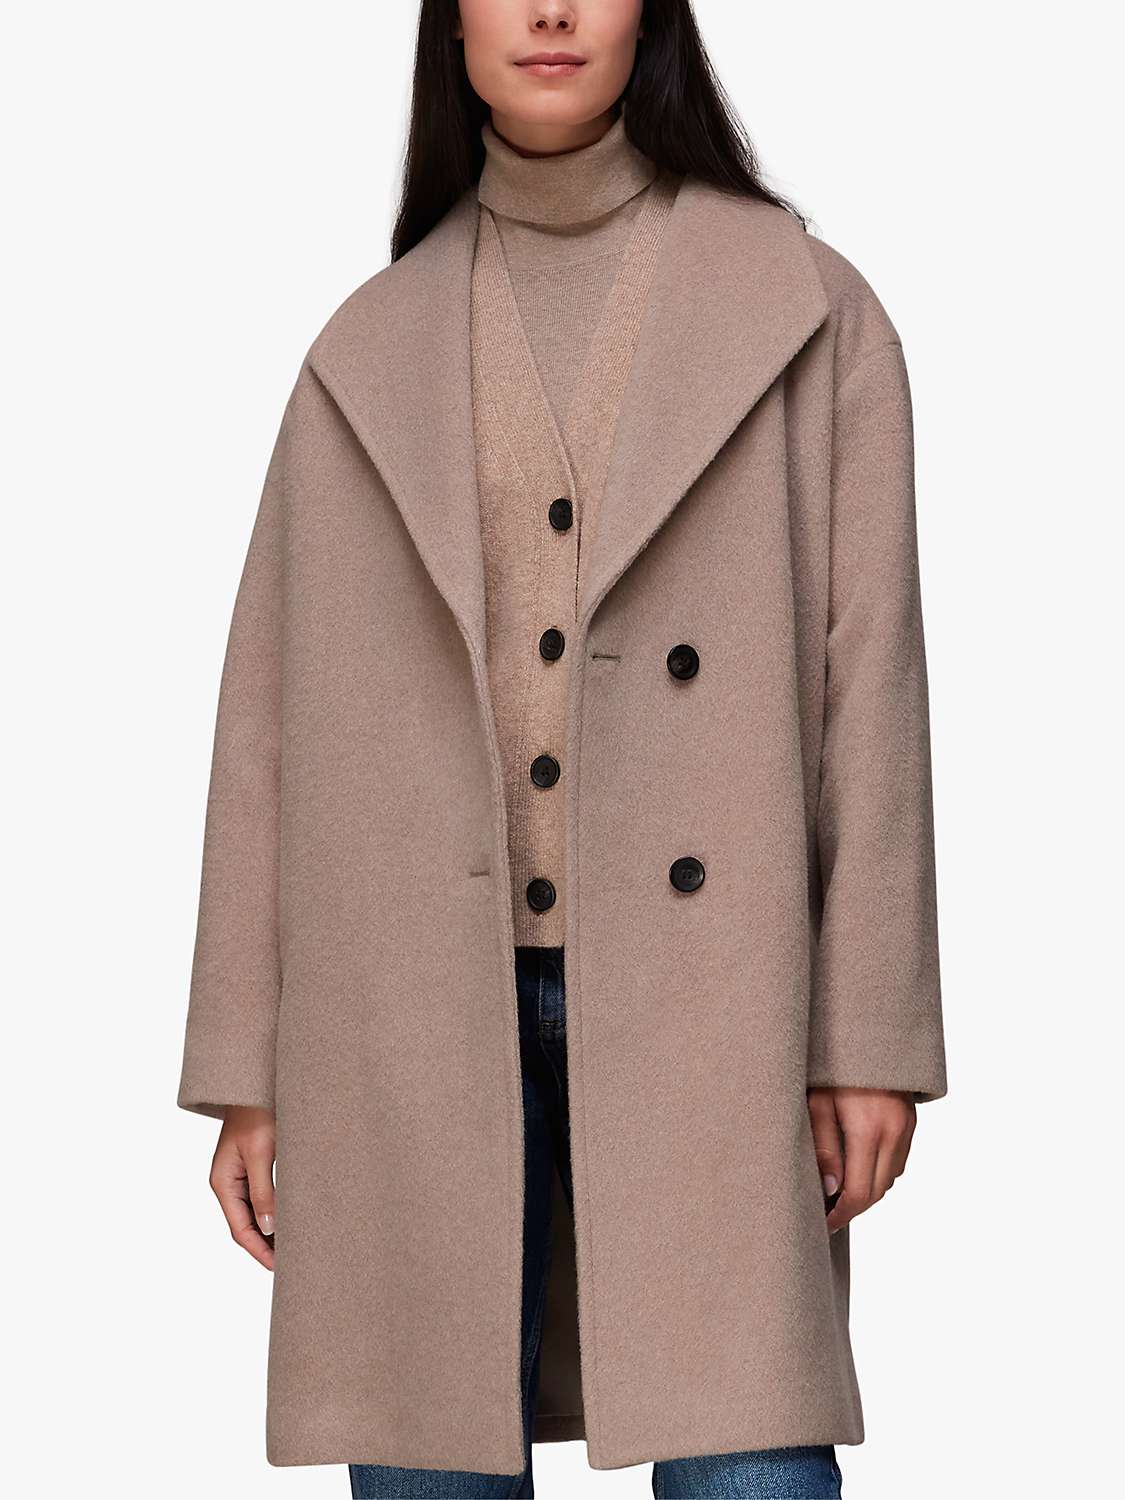 Buy Whistles Wide Collar Wool Rich Coat, Oatmeal Online at johnlewis.com